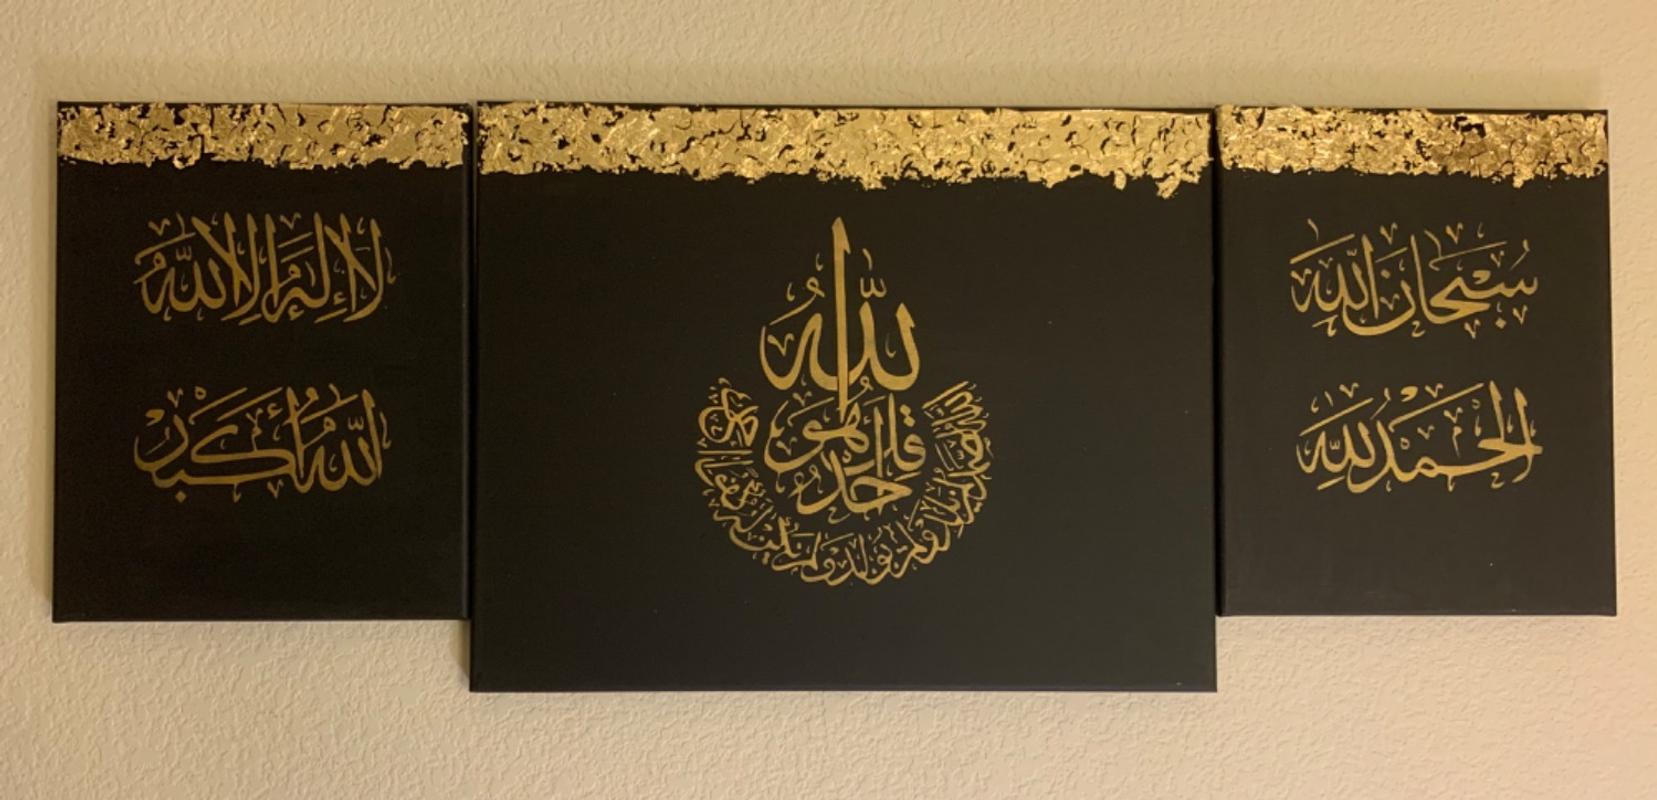 Arabic Stencil by Home Synchronize-Islamic Calligraphy- Alhamdulilah-  Reusable Stencil for Painting-4 x 4